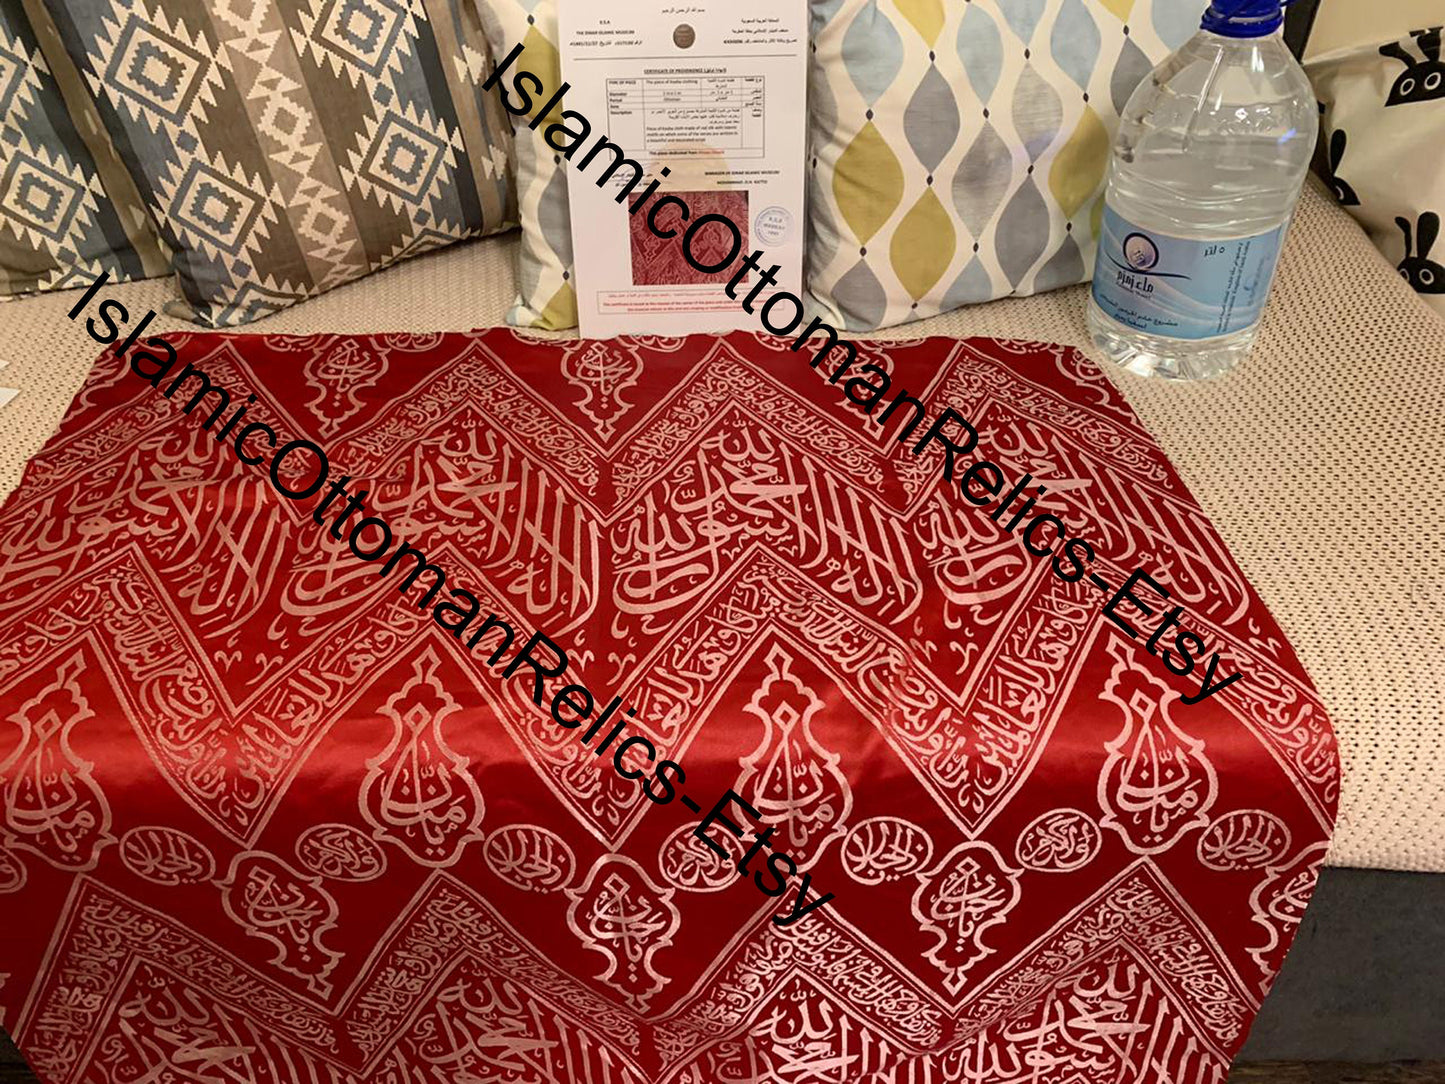 Holy Kaaba Red Covering Cloth / Precous Unique Gift Idea For Muslim Family and Friend, 100 cm x 55 cm